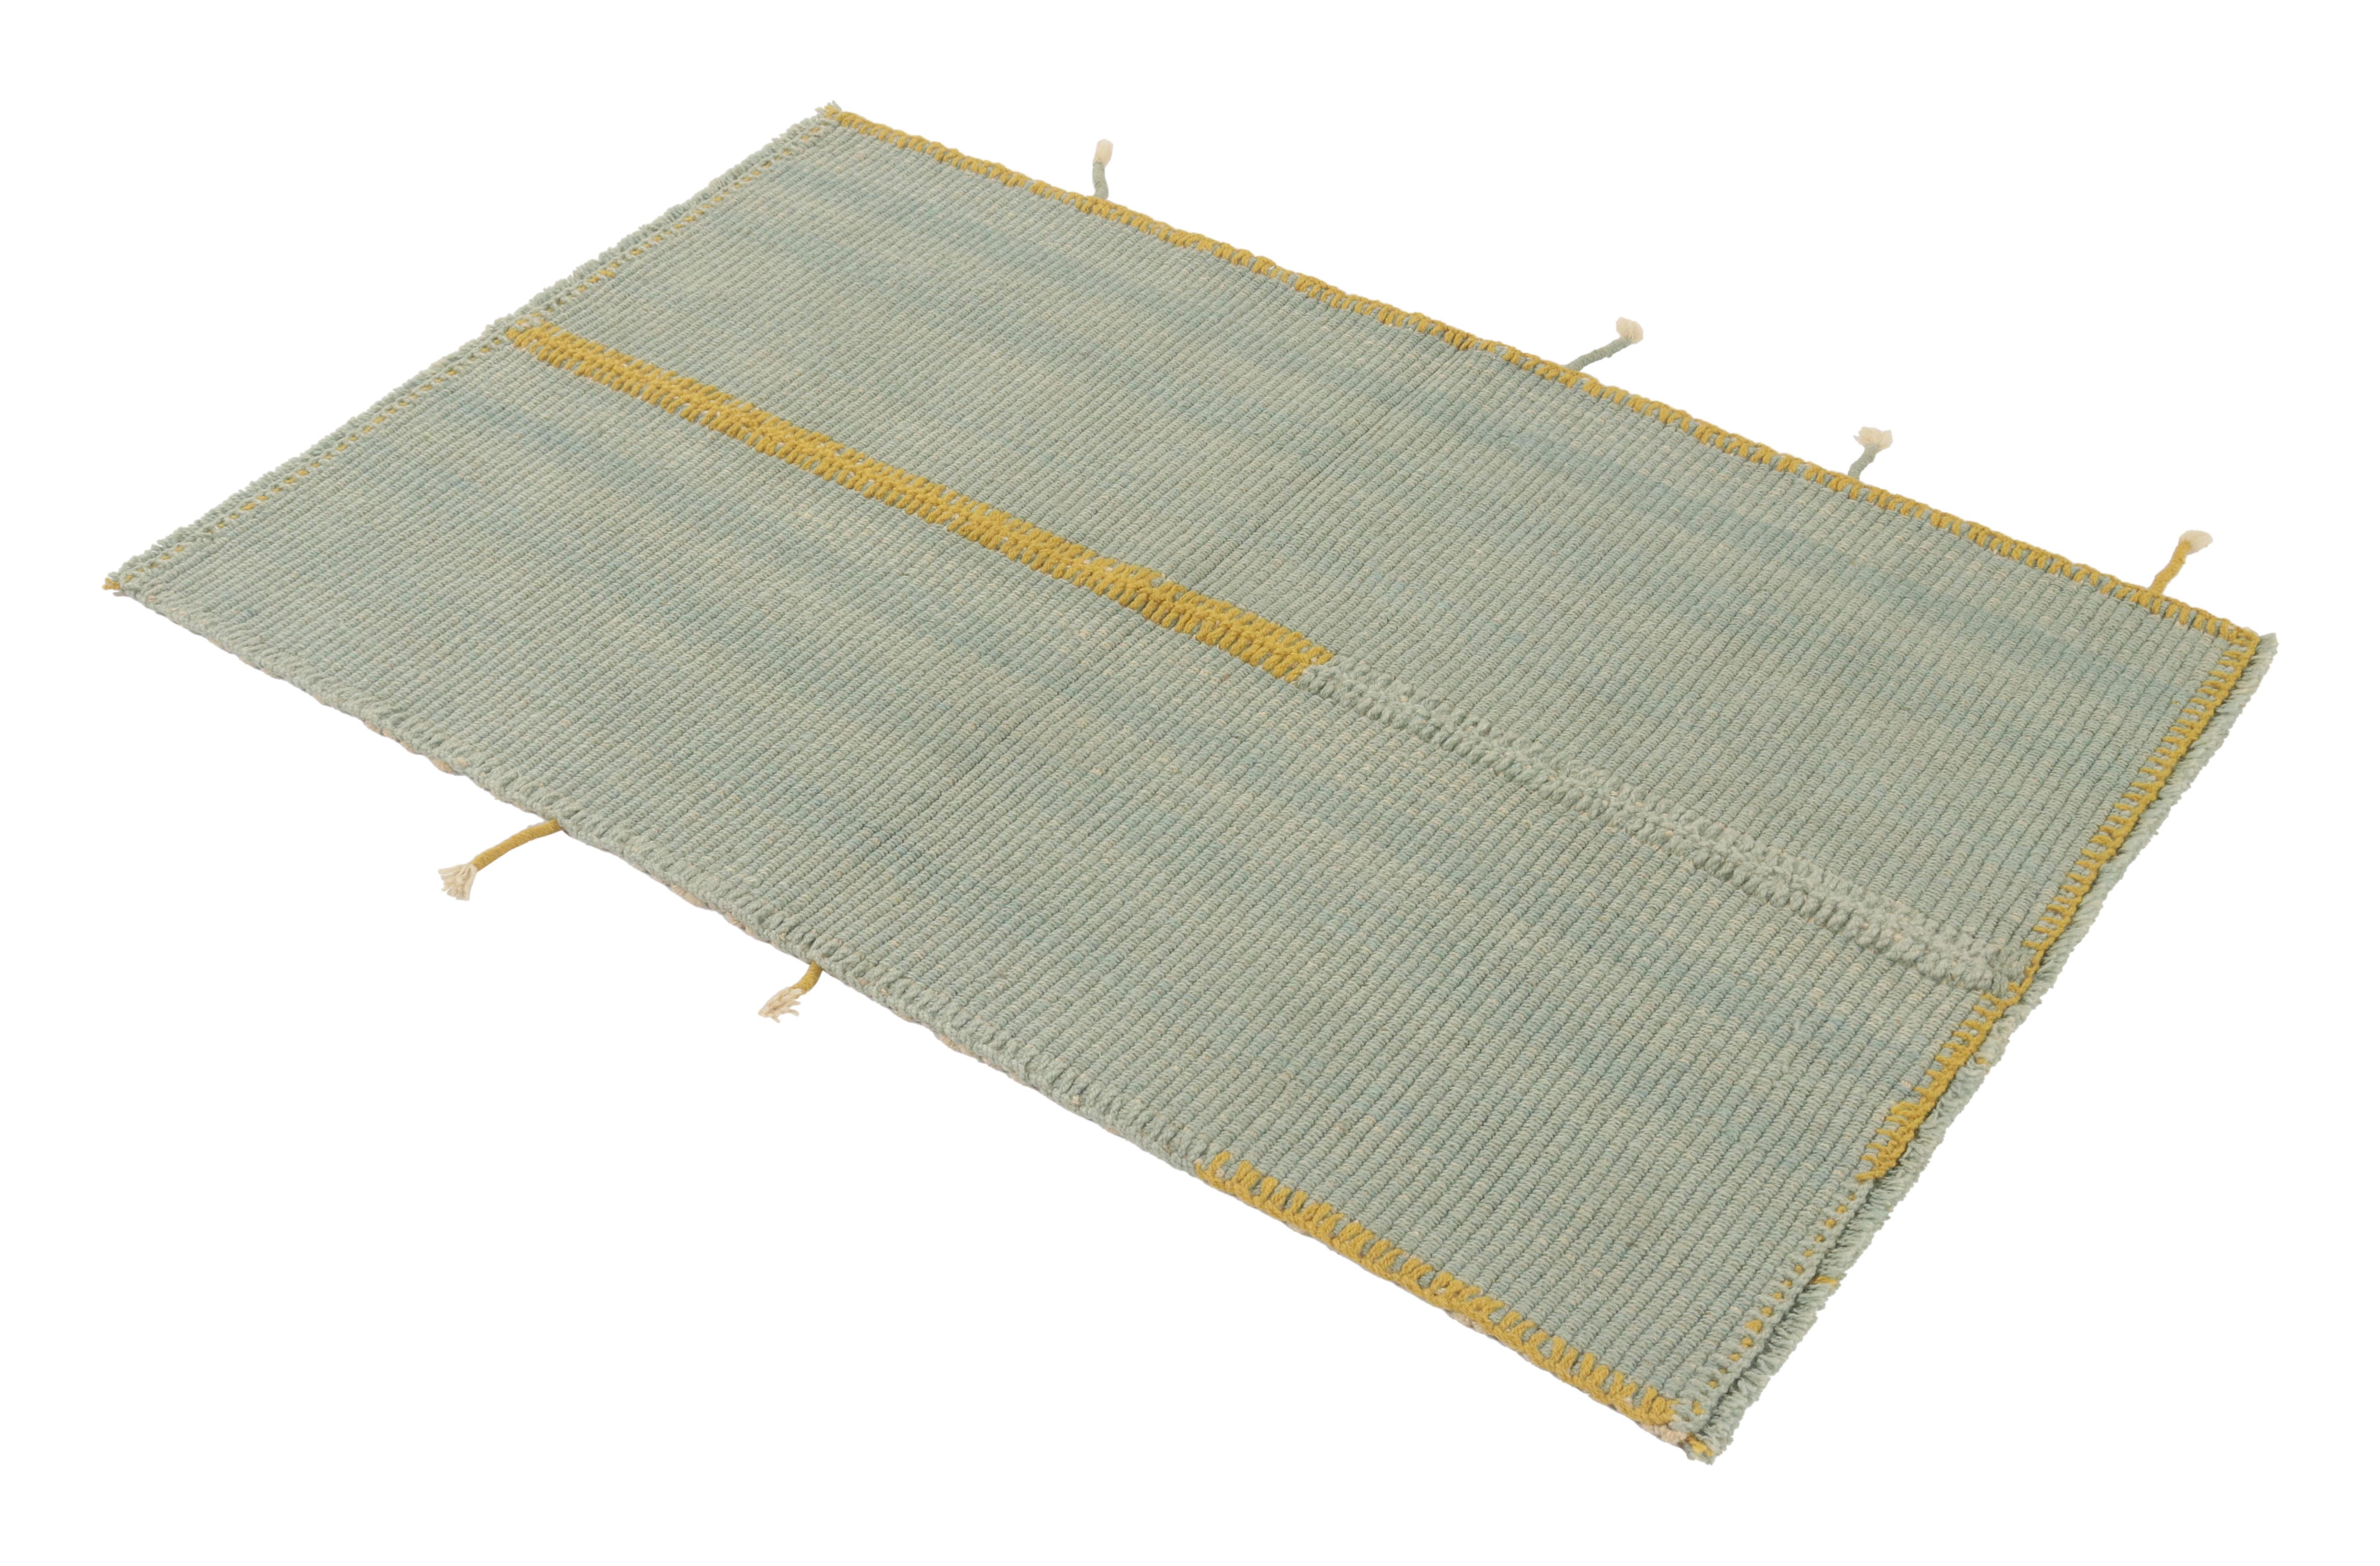 Handwoven in wool, a gift-sized 3x4 Kilim from an innovative new contemporary flat weave collection by Rug & Kilim.
On the Design:
The “Rez Kilim” connotes a modern take on classic panel weaving—this edition enjoying seafoam blue and ochre